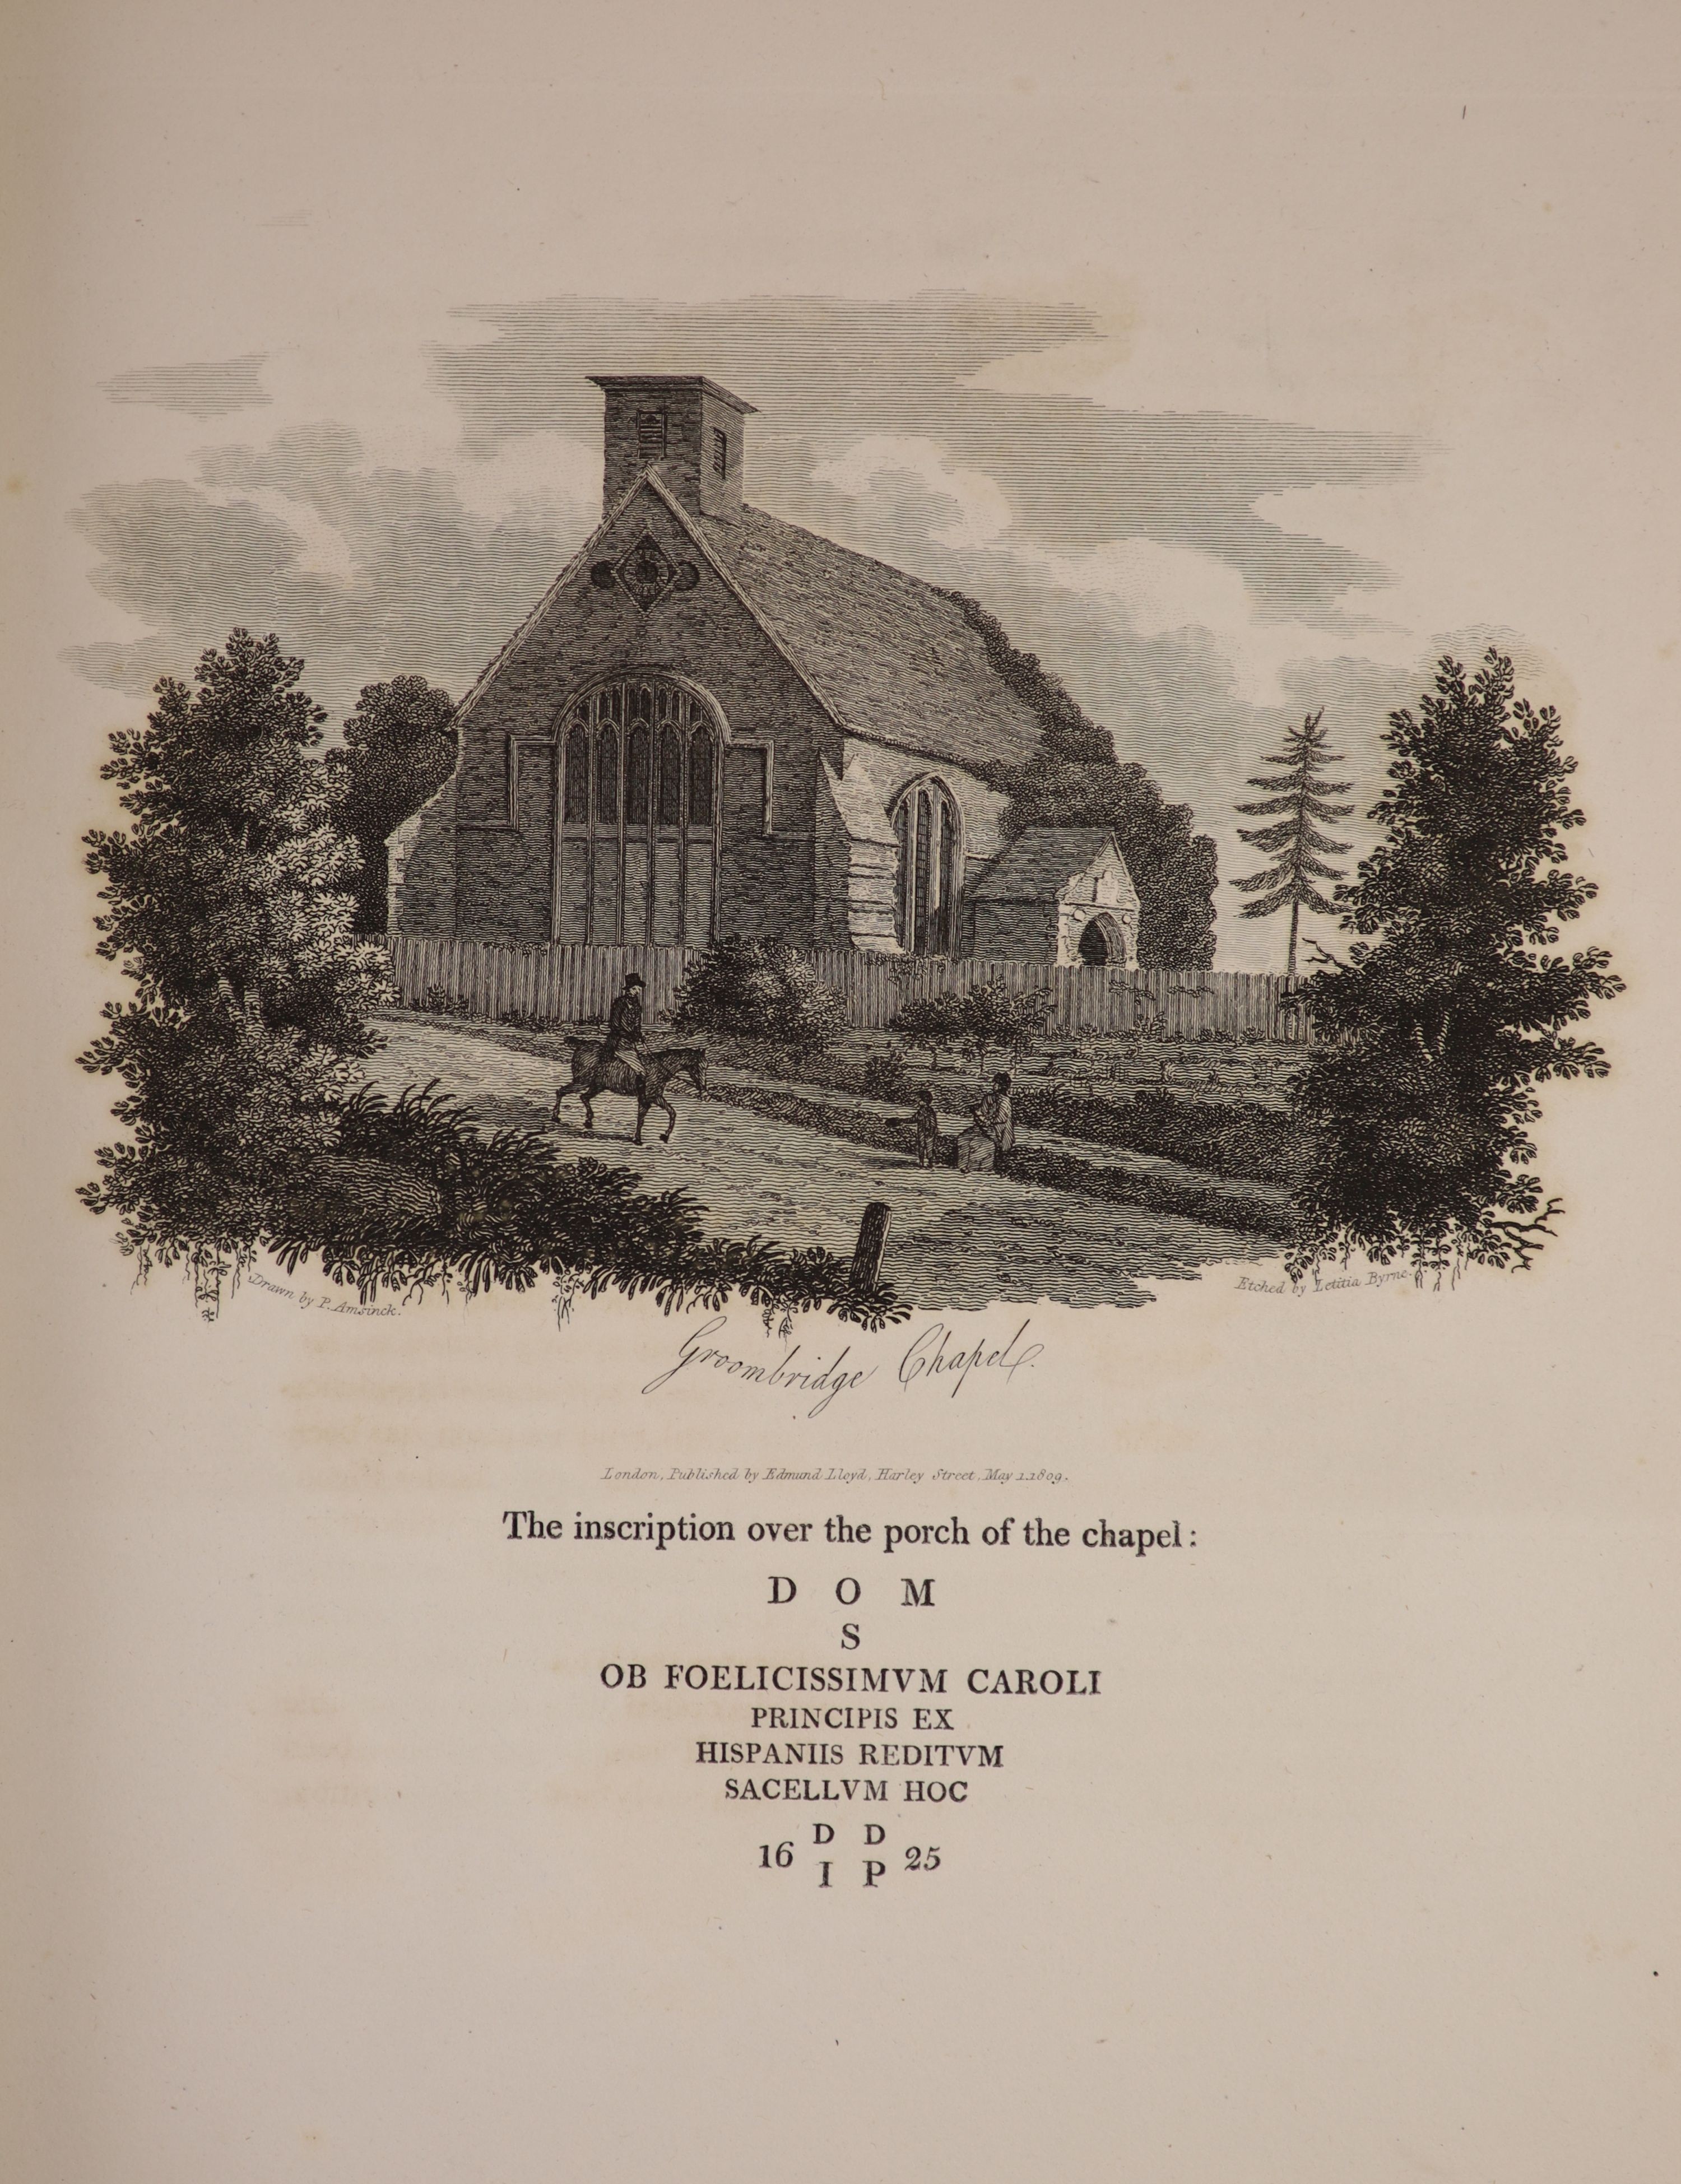 Amsinck, Paul - Tunbridge Wells, and its Neighourhood, qto, later red cloth, with frontis and 31 plates, text and plates browned, William Miller, London, 1810